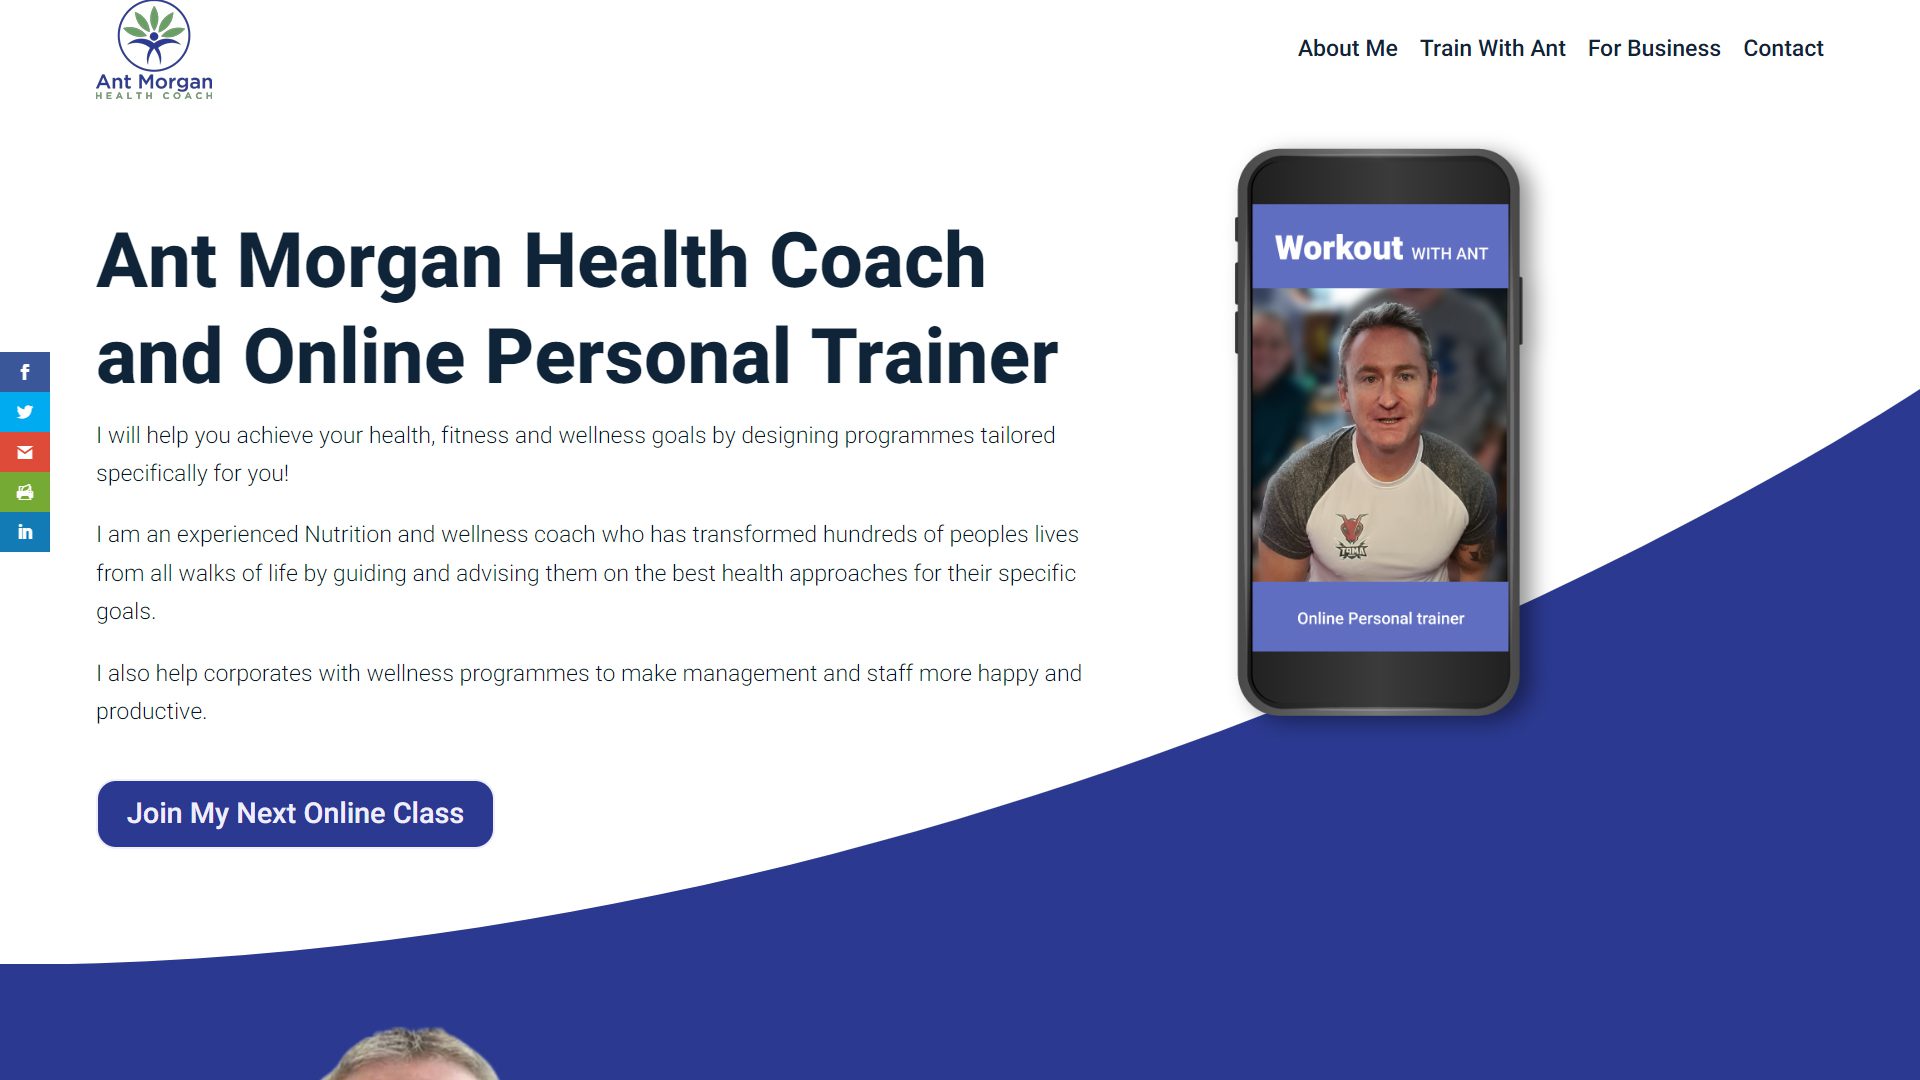 Ant Morgan Health Coach Above the Fold Section